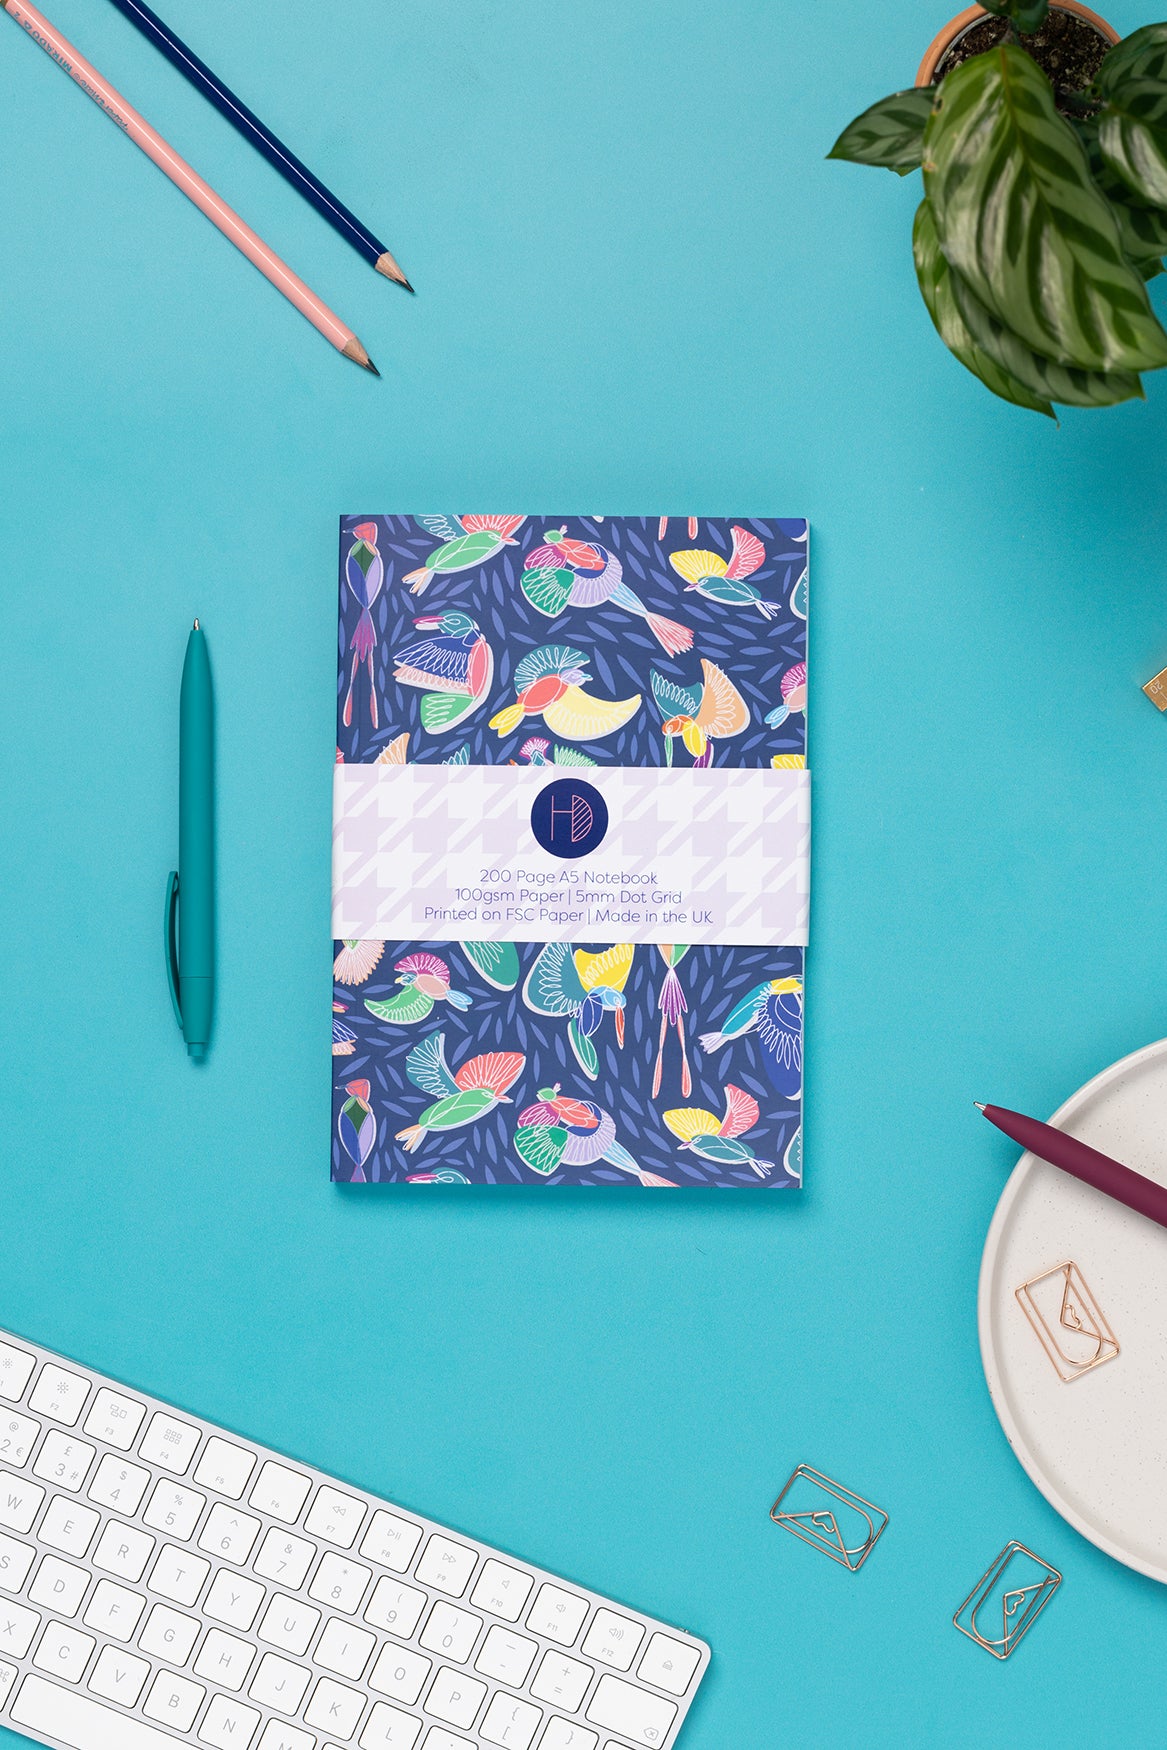 Paradise A5 Dot Grid Notebook, with its belly-band packaging around it, is on a teal desk with some pens, and a keyboard to the bottom left corner.  The book's cover features a navy background with line-drawn bird motifs and offset coloured blocks behind them.